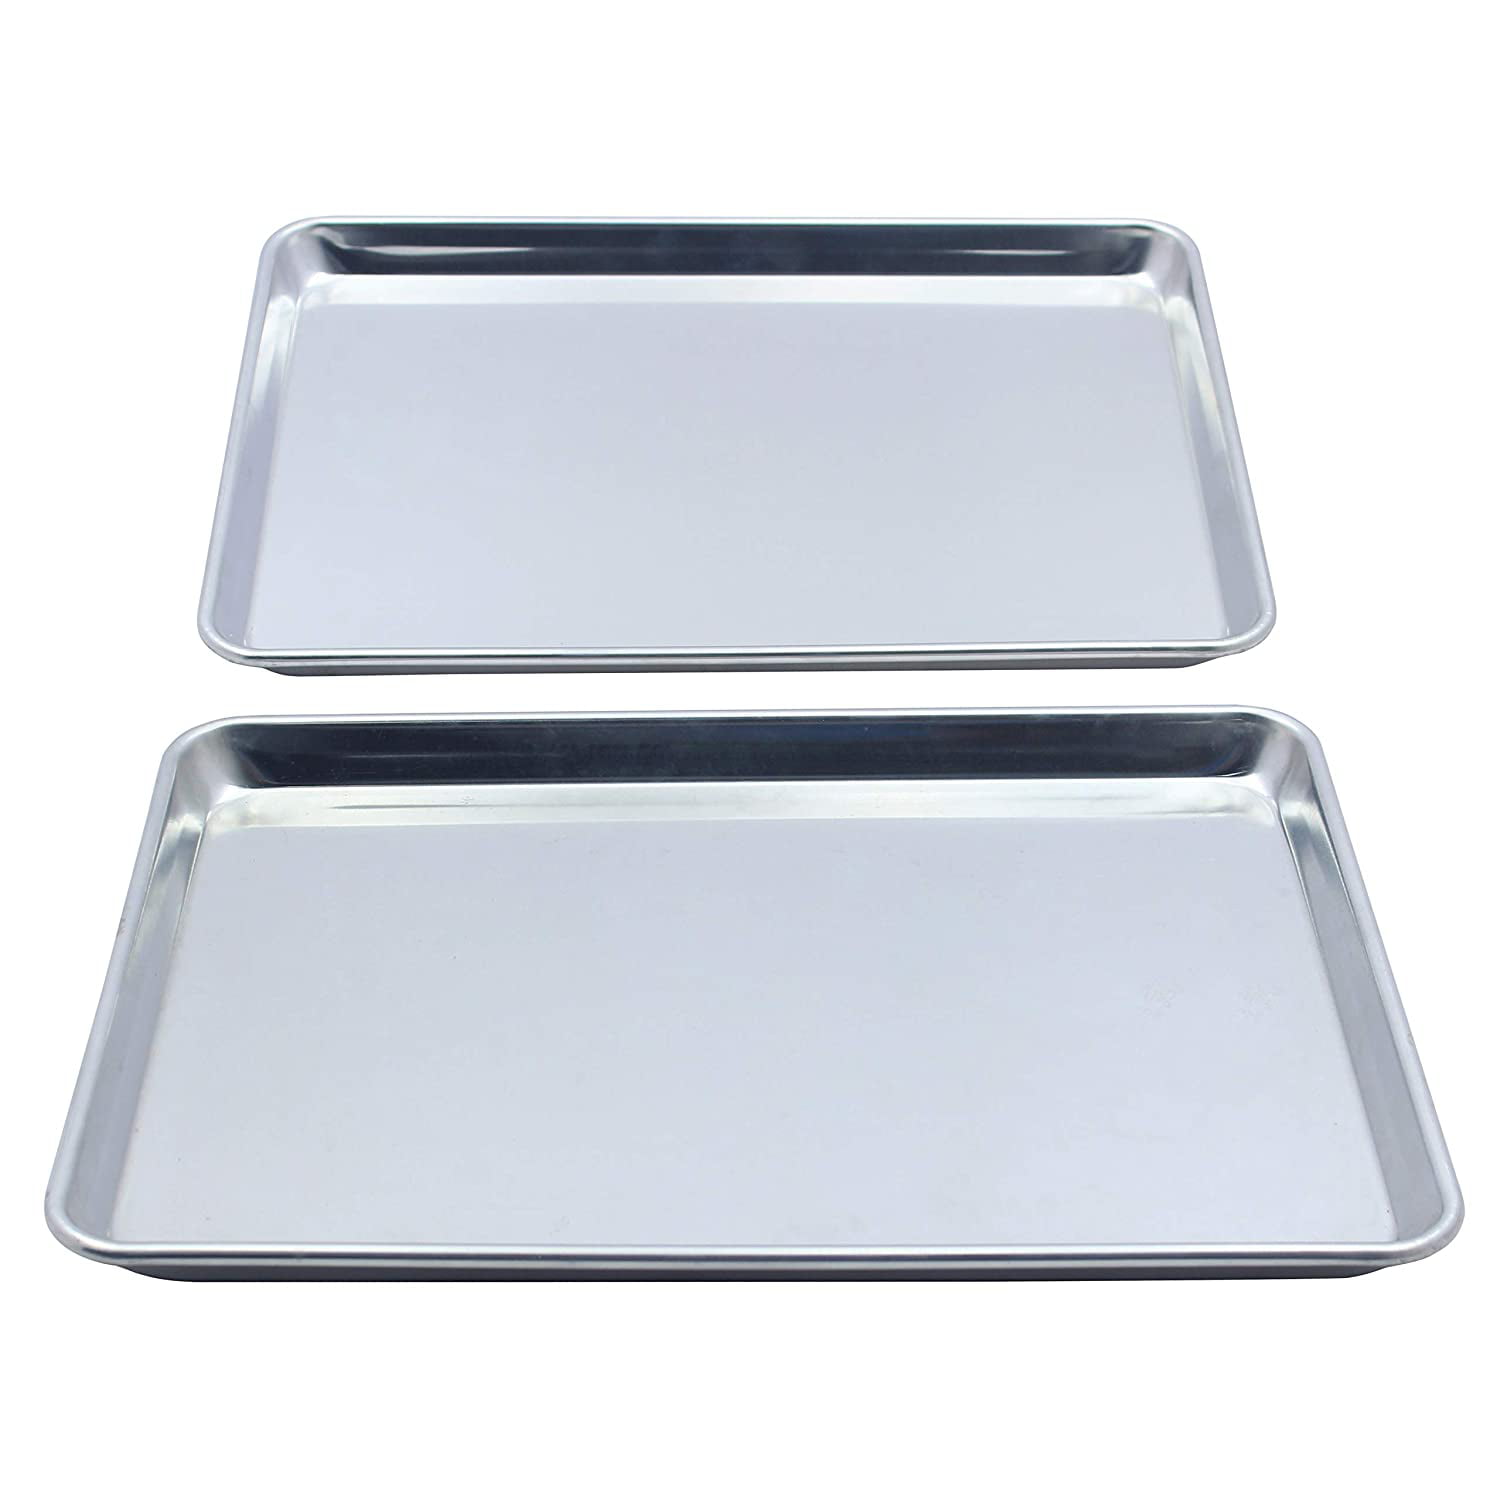 Checkered Chef Stainless Steel Quarter Sheet Pan Twin Pack 2 Small Baking Sheets 9 Â½ x 13